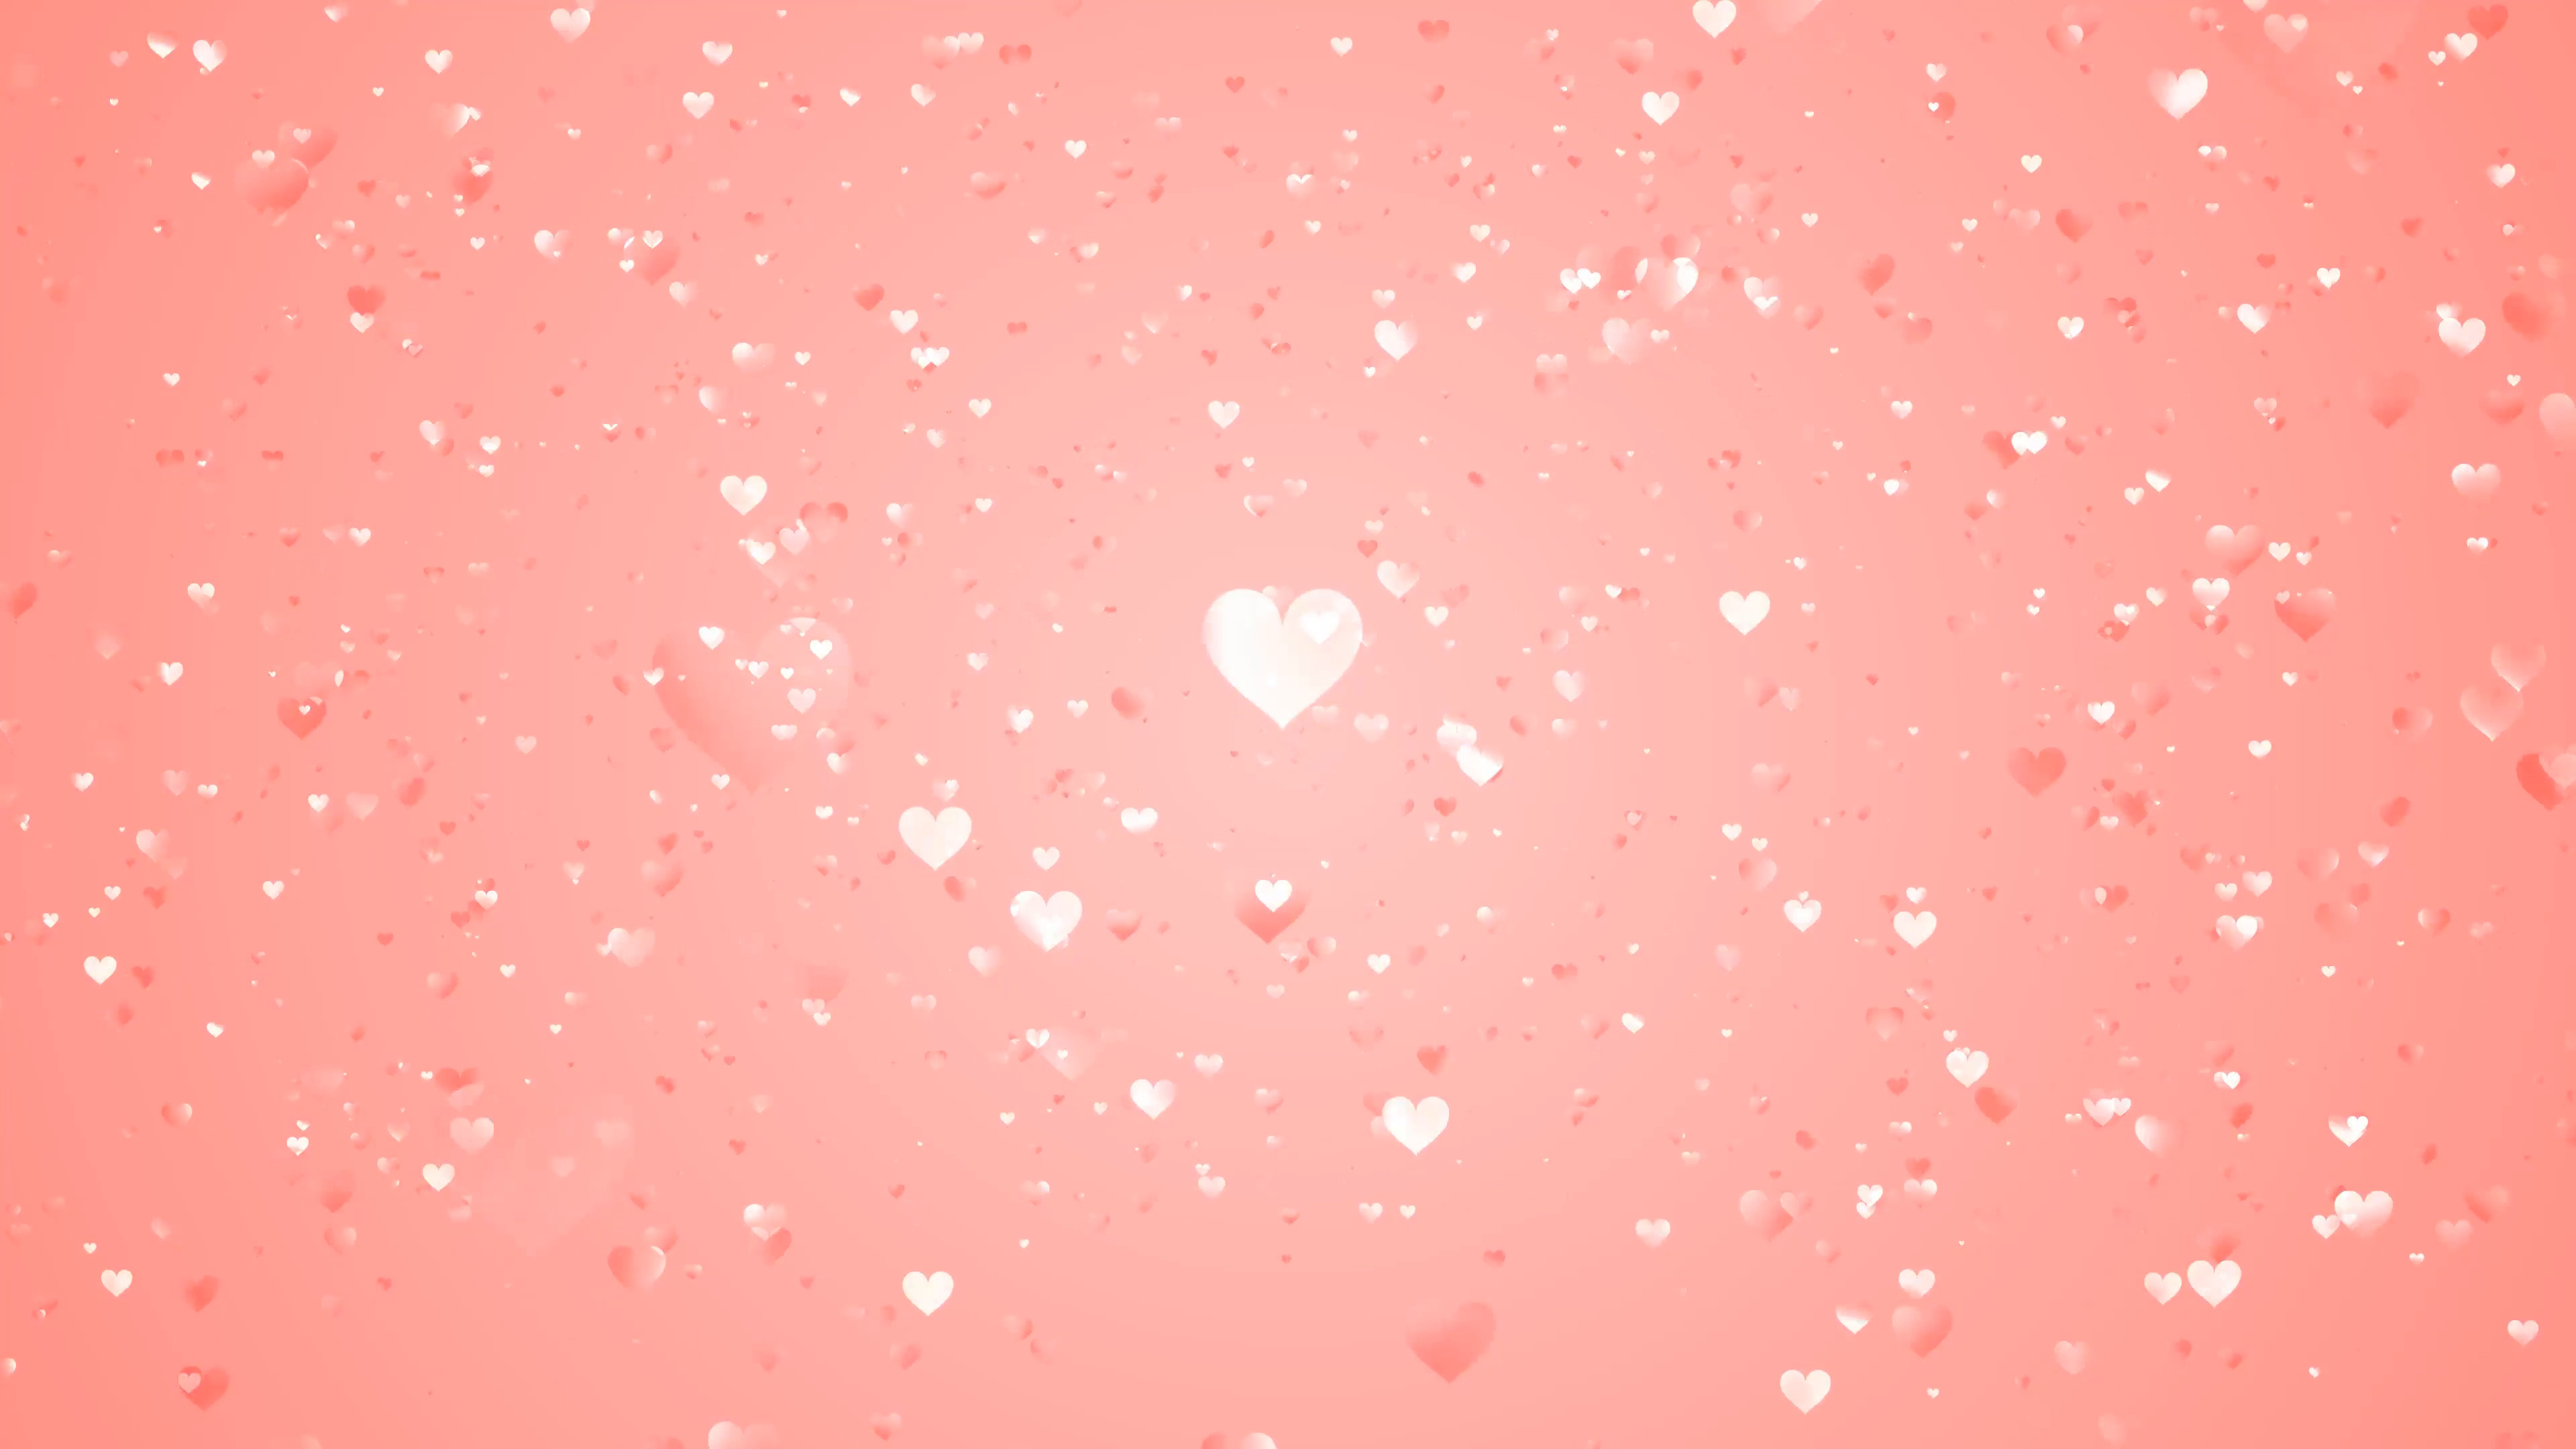 Pink Heart Background 33 Pictures